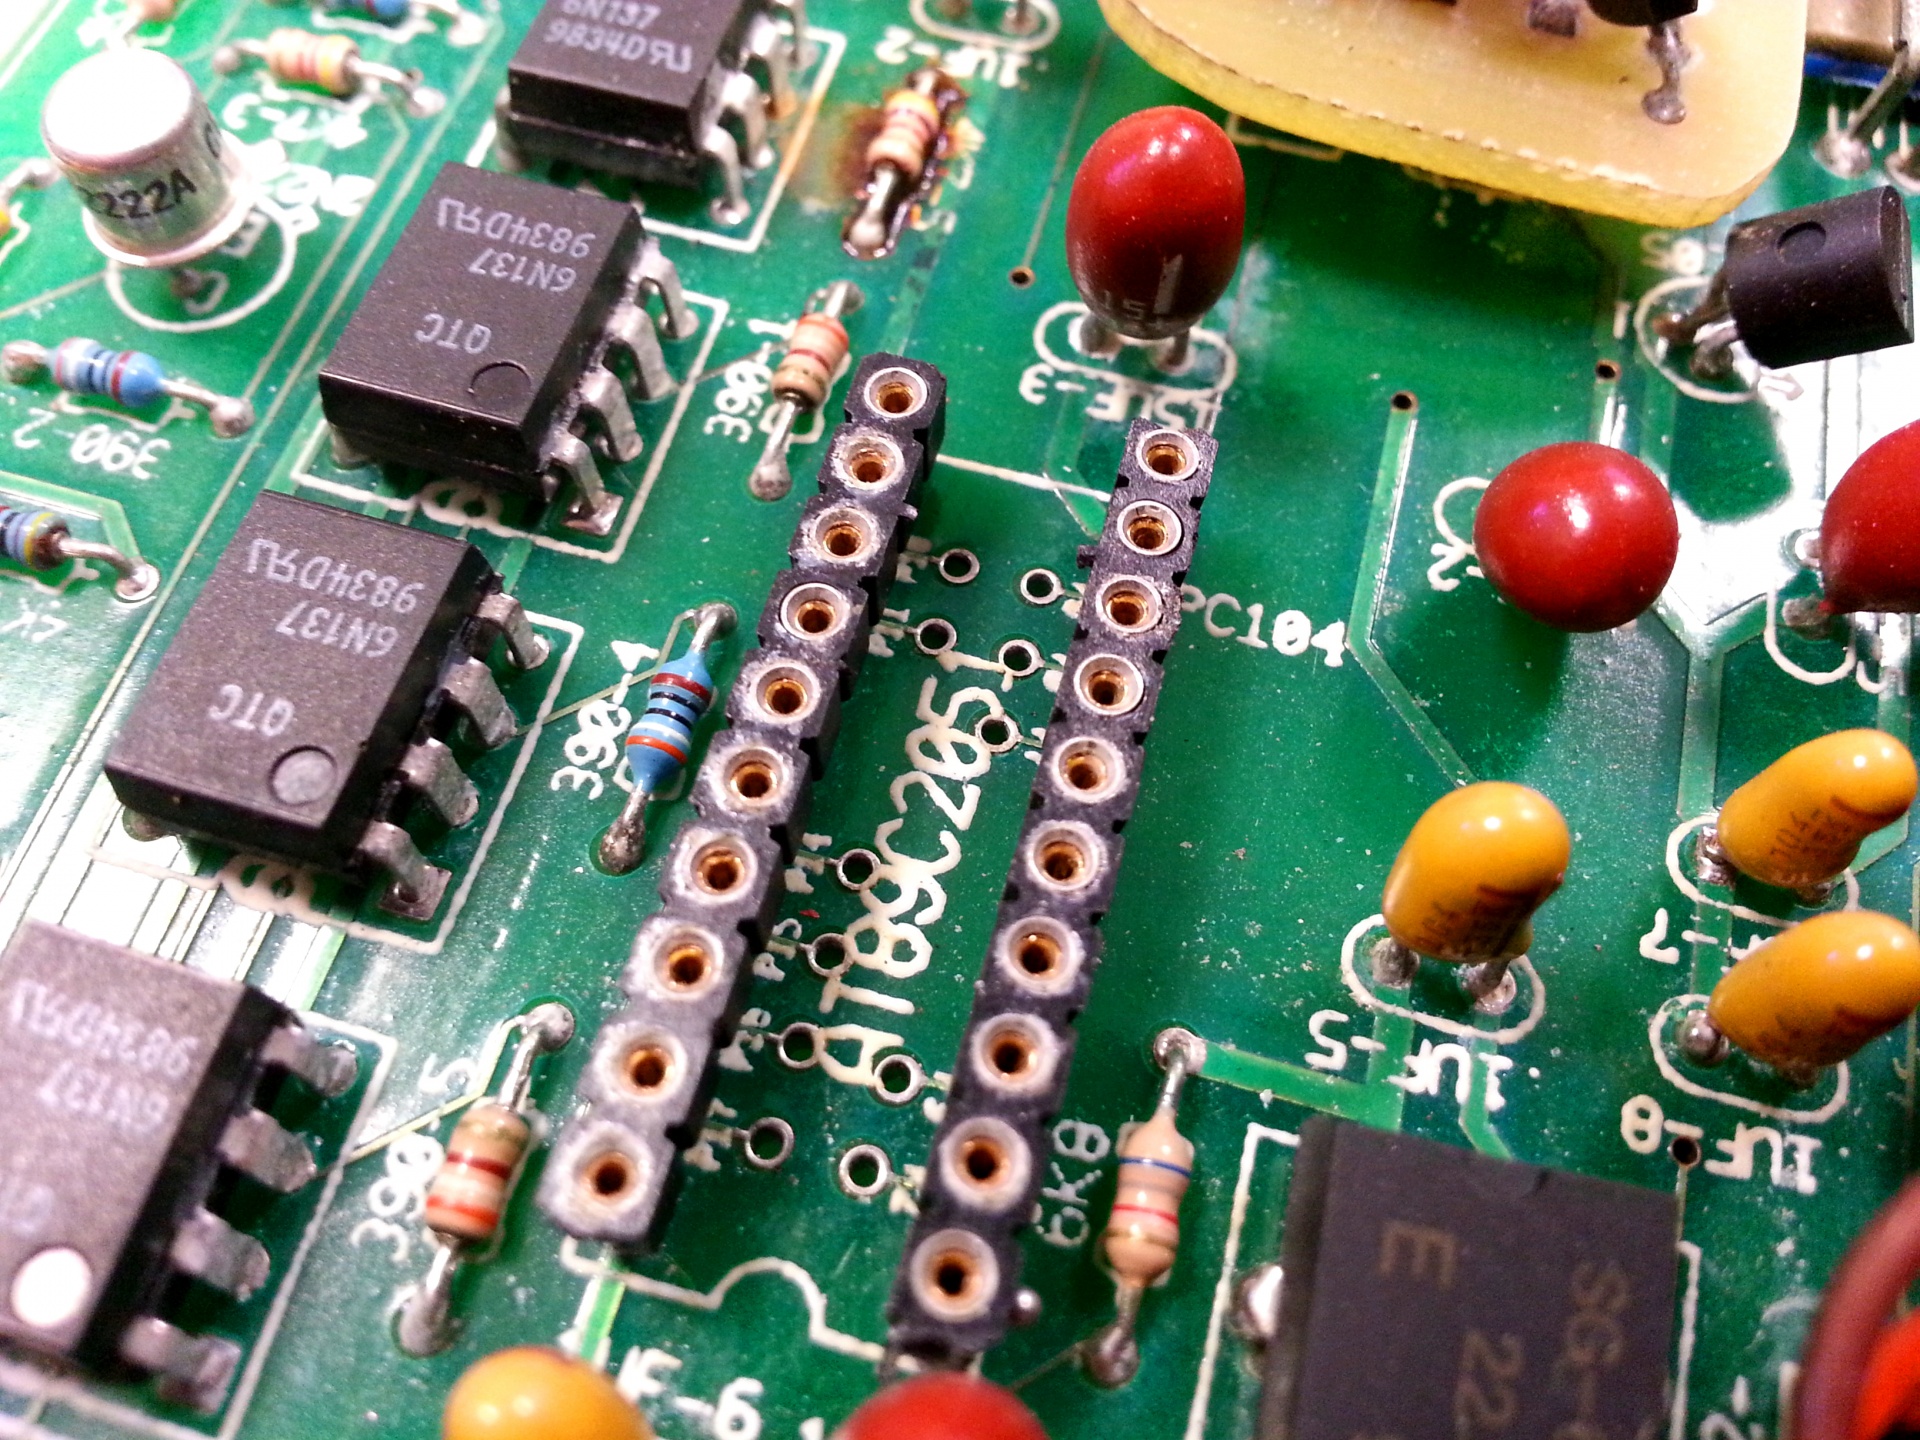 An old electronic board